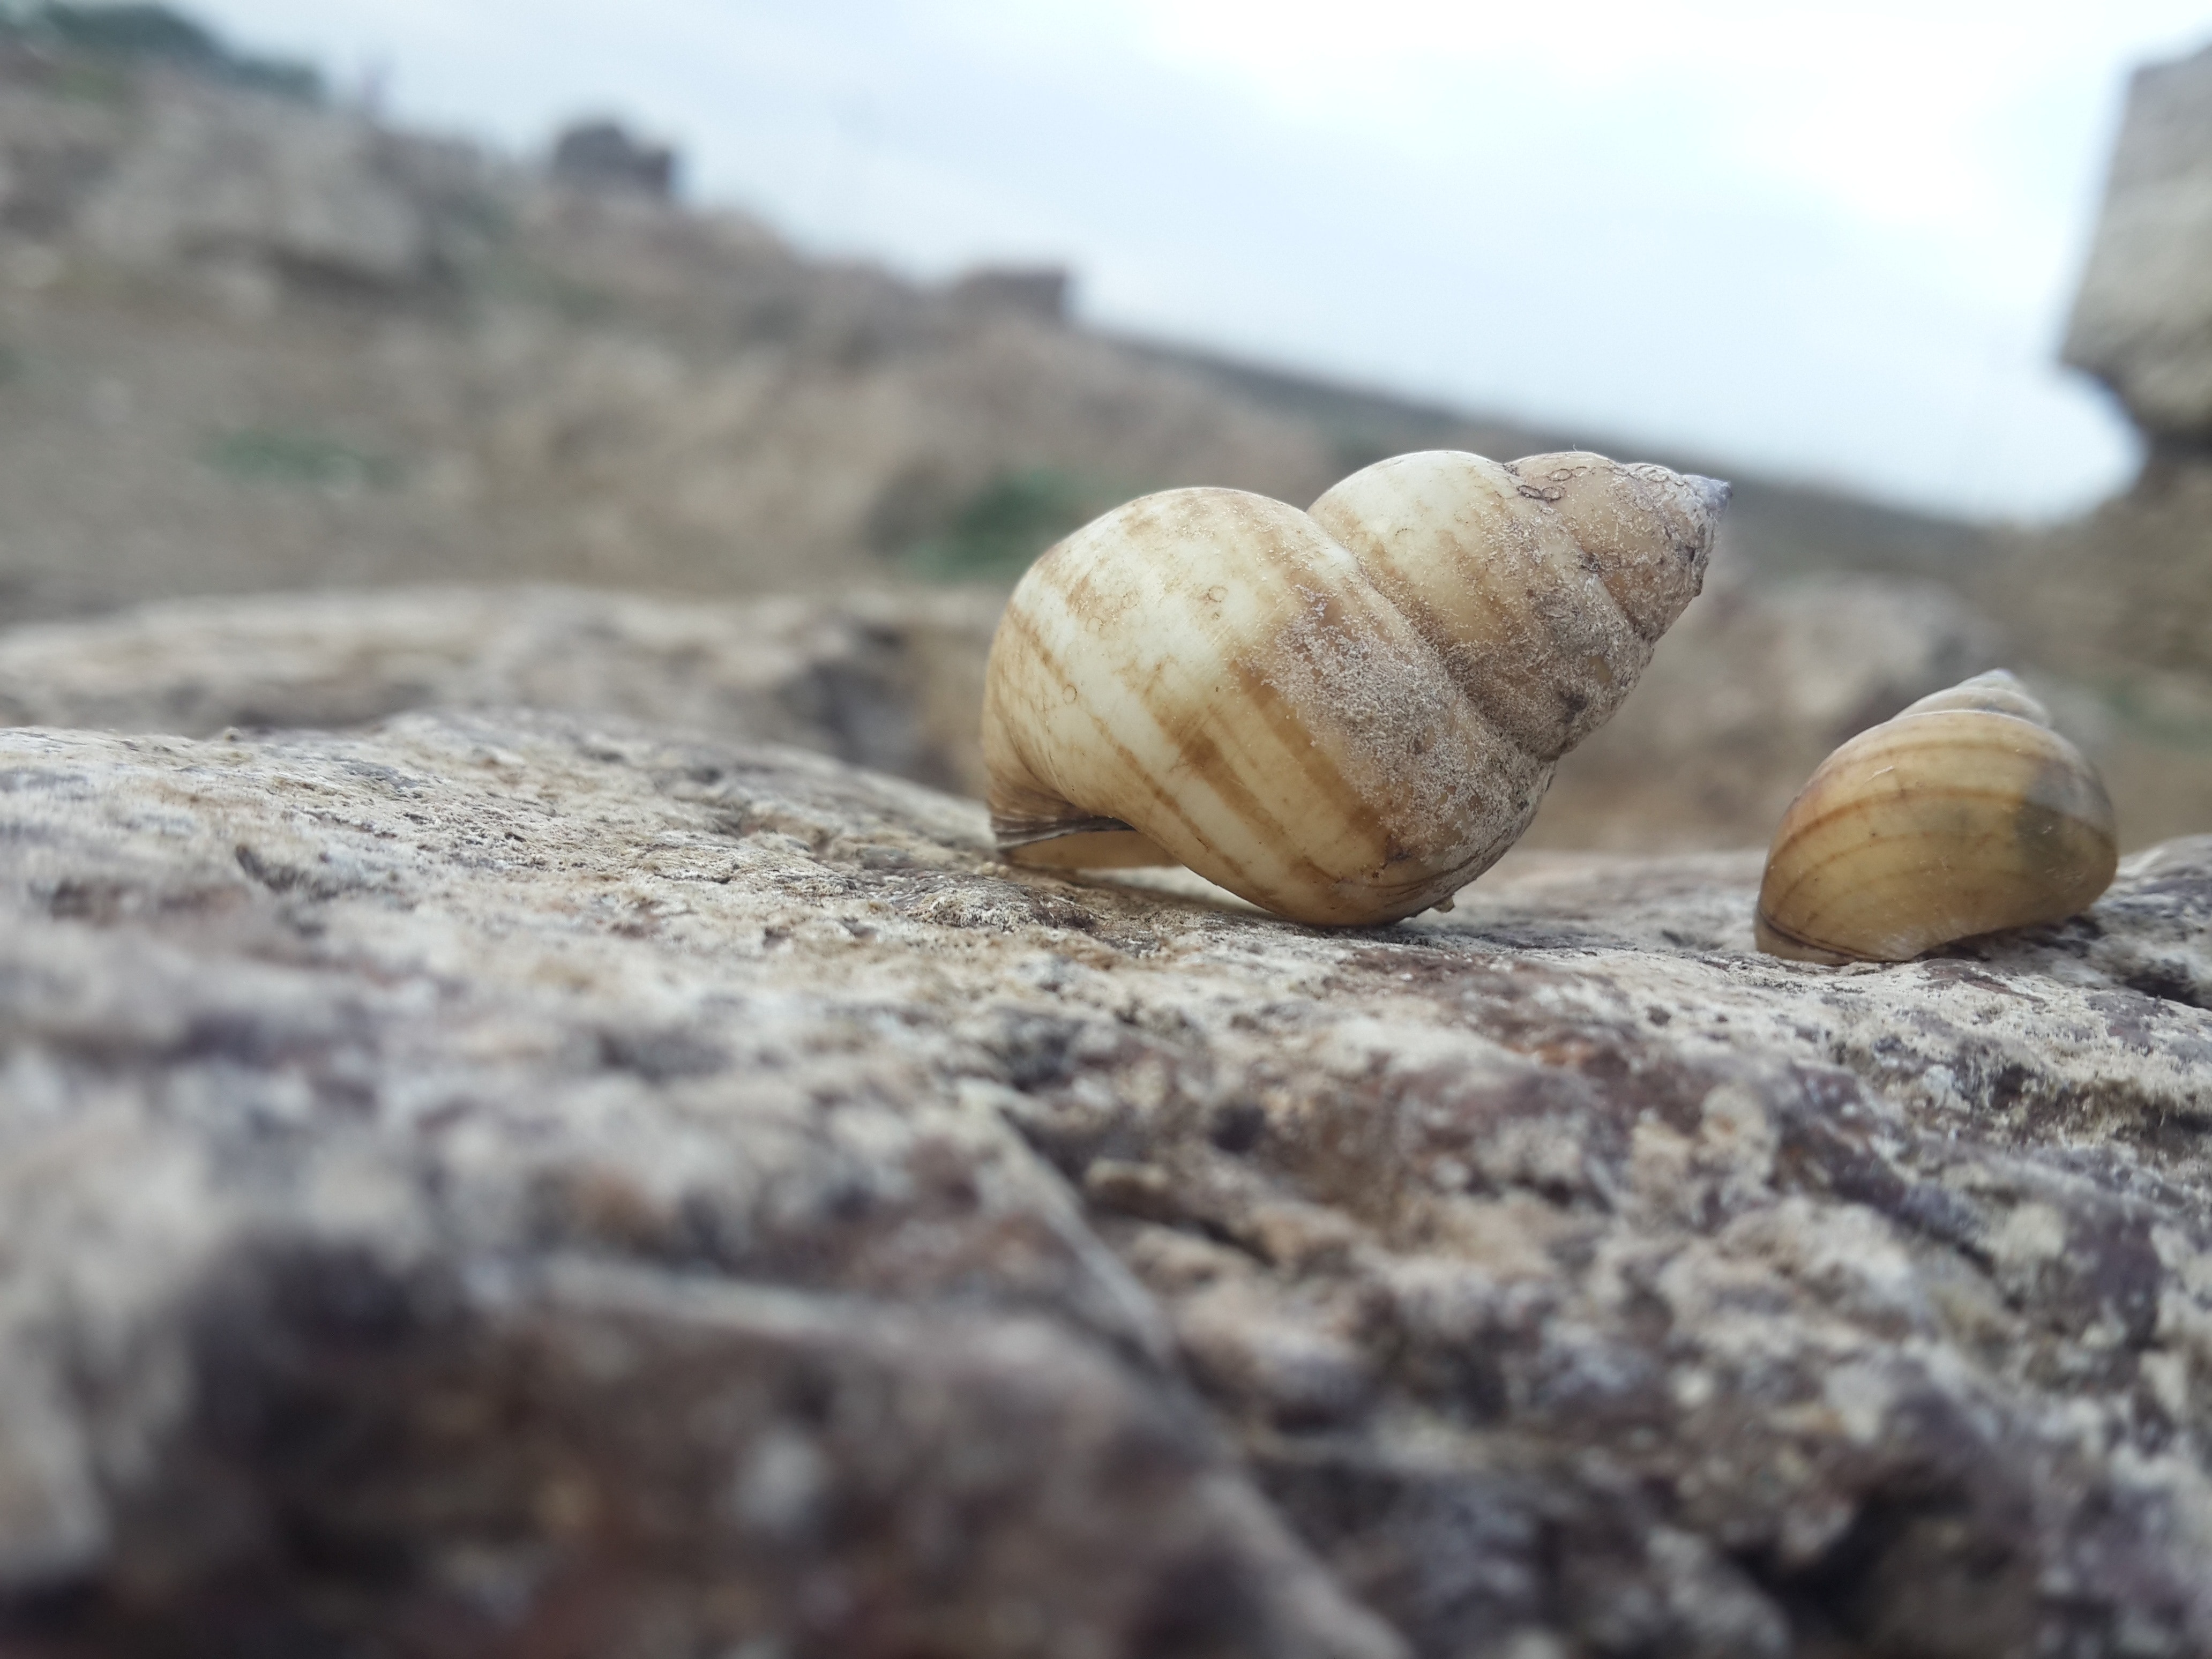 2 beige and gray shell snails